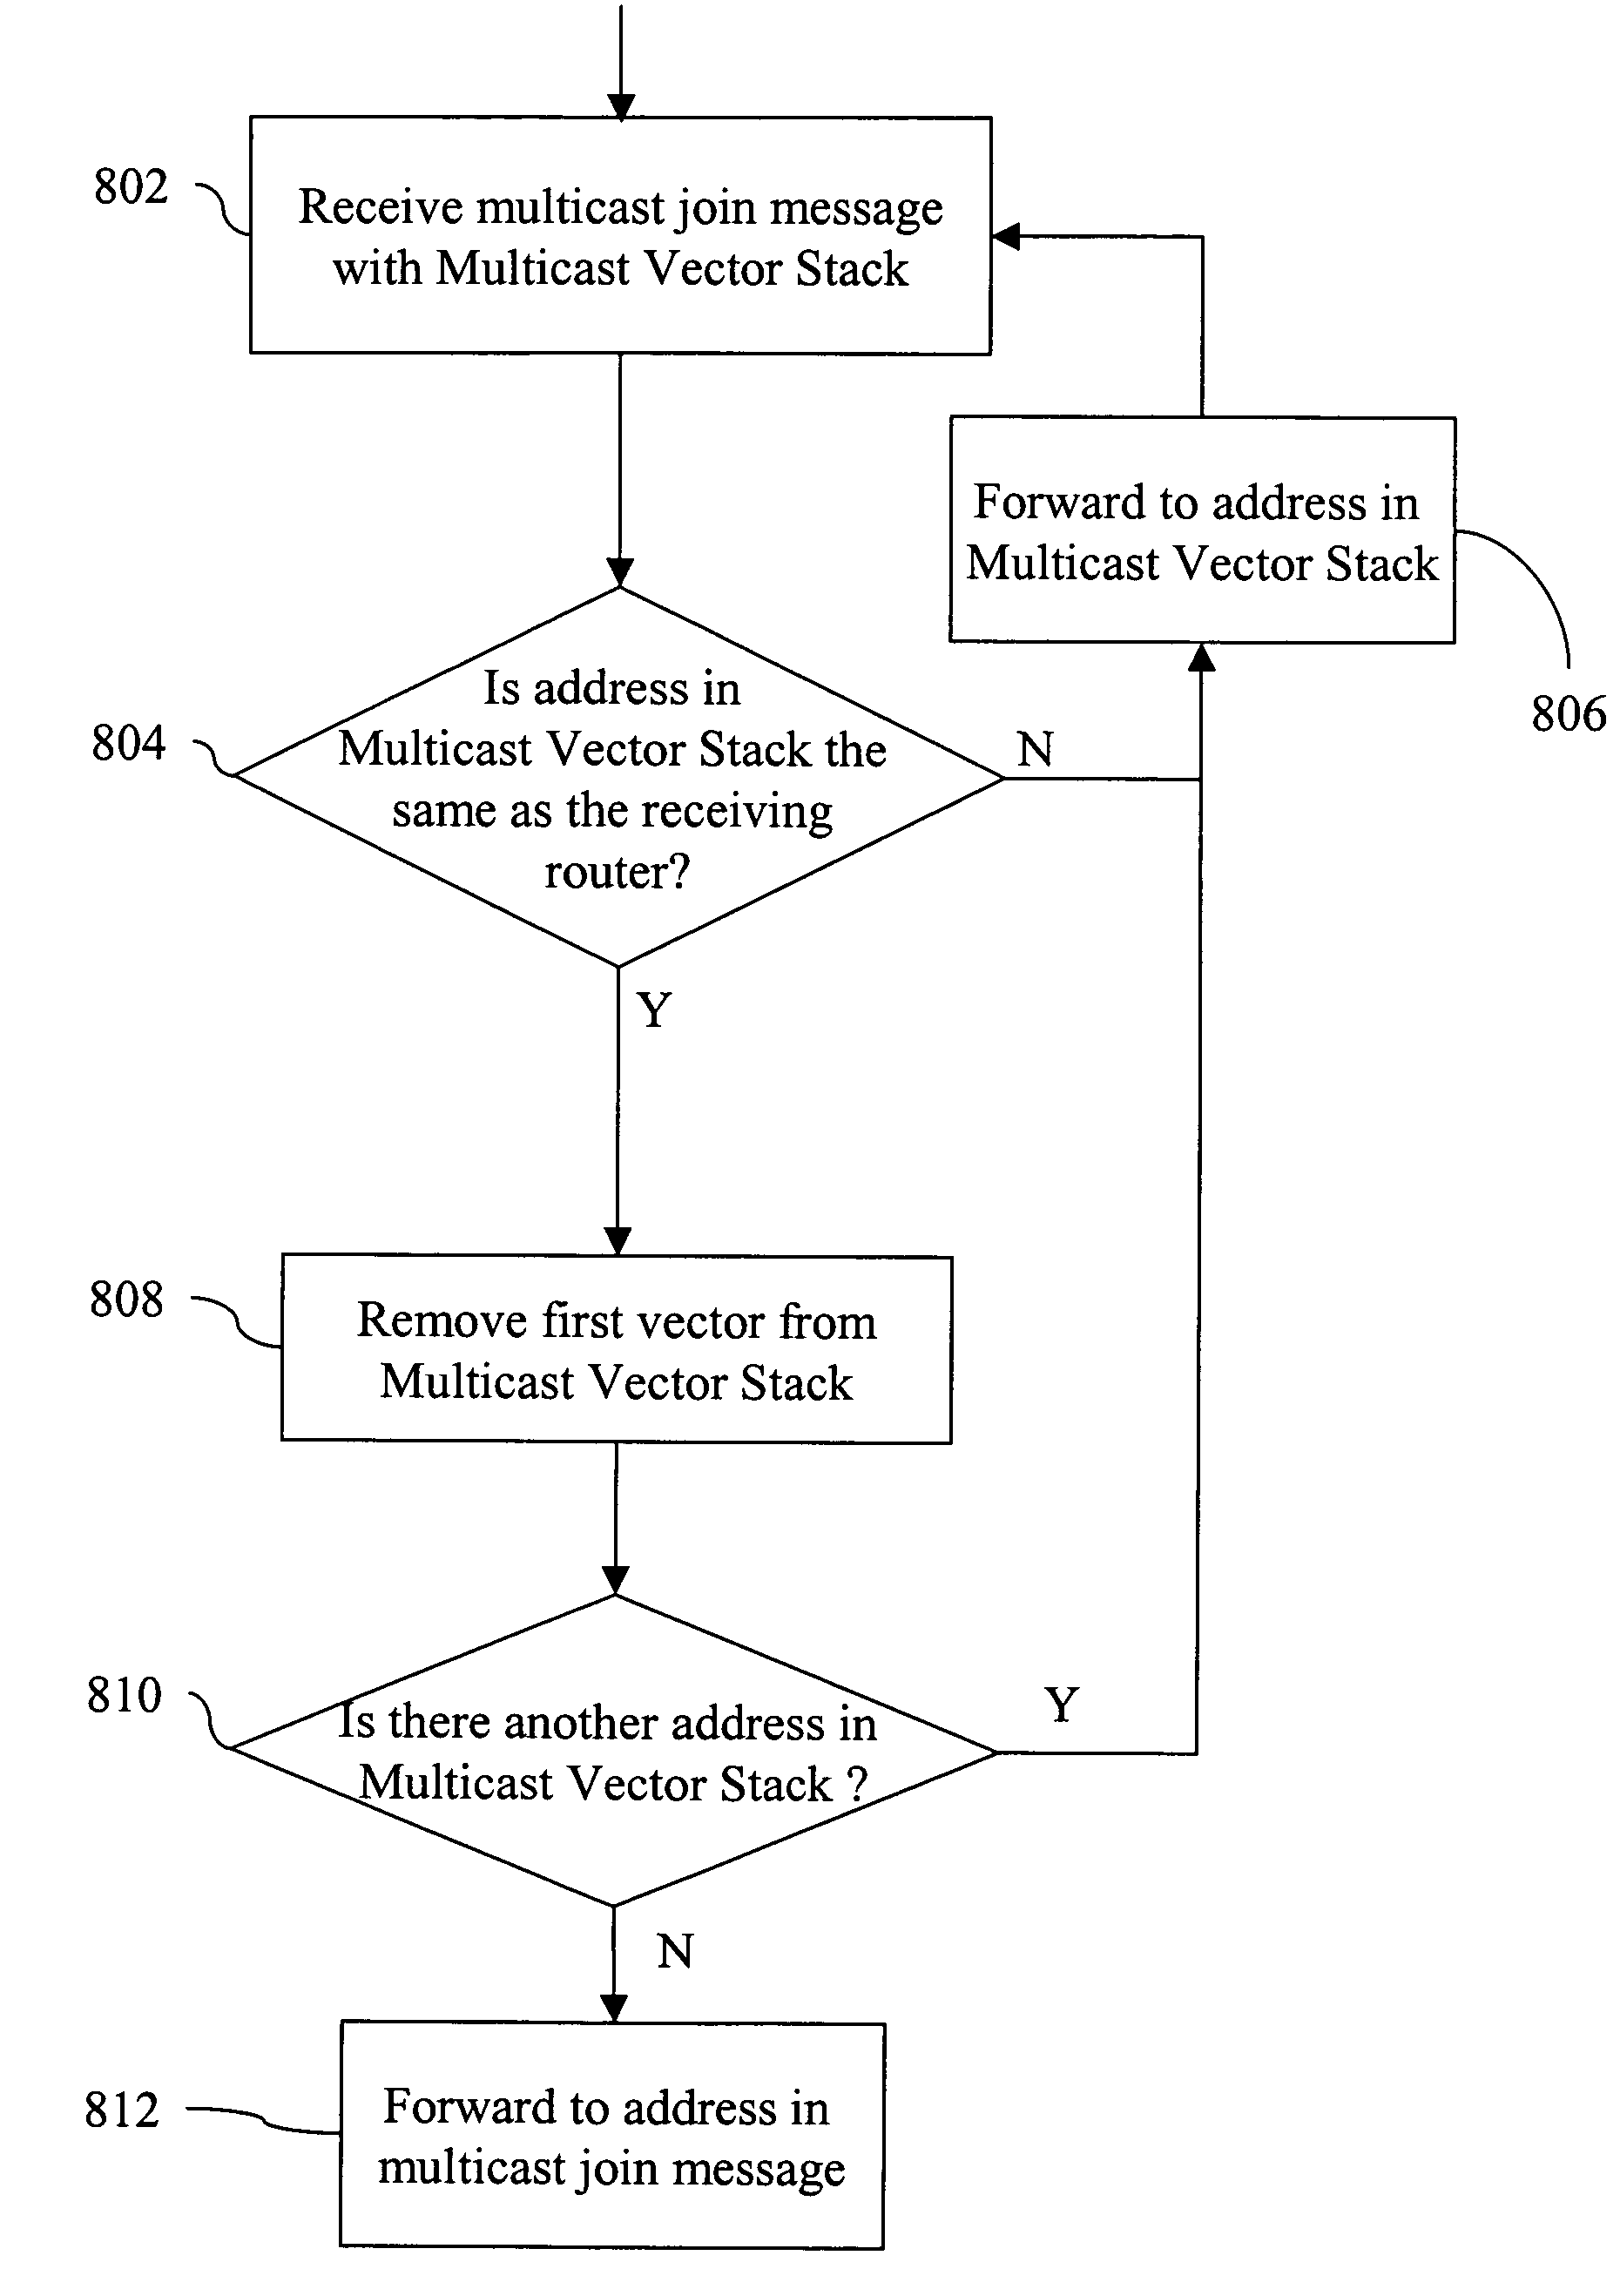 Method and apparatus for providing multicast messages across a data communication network